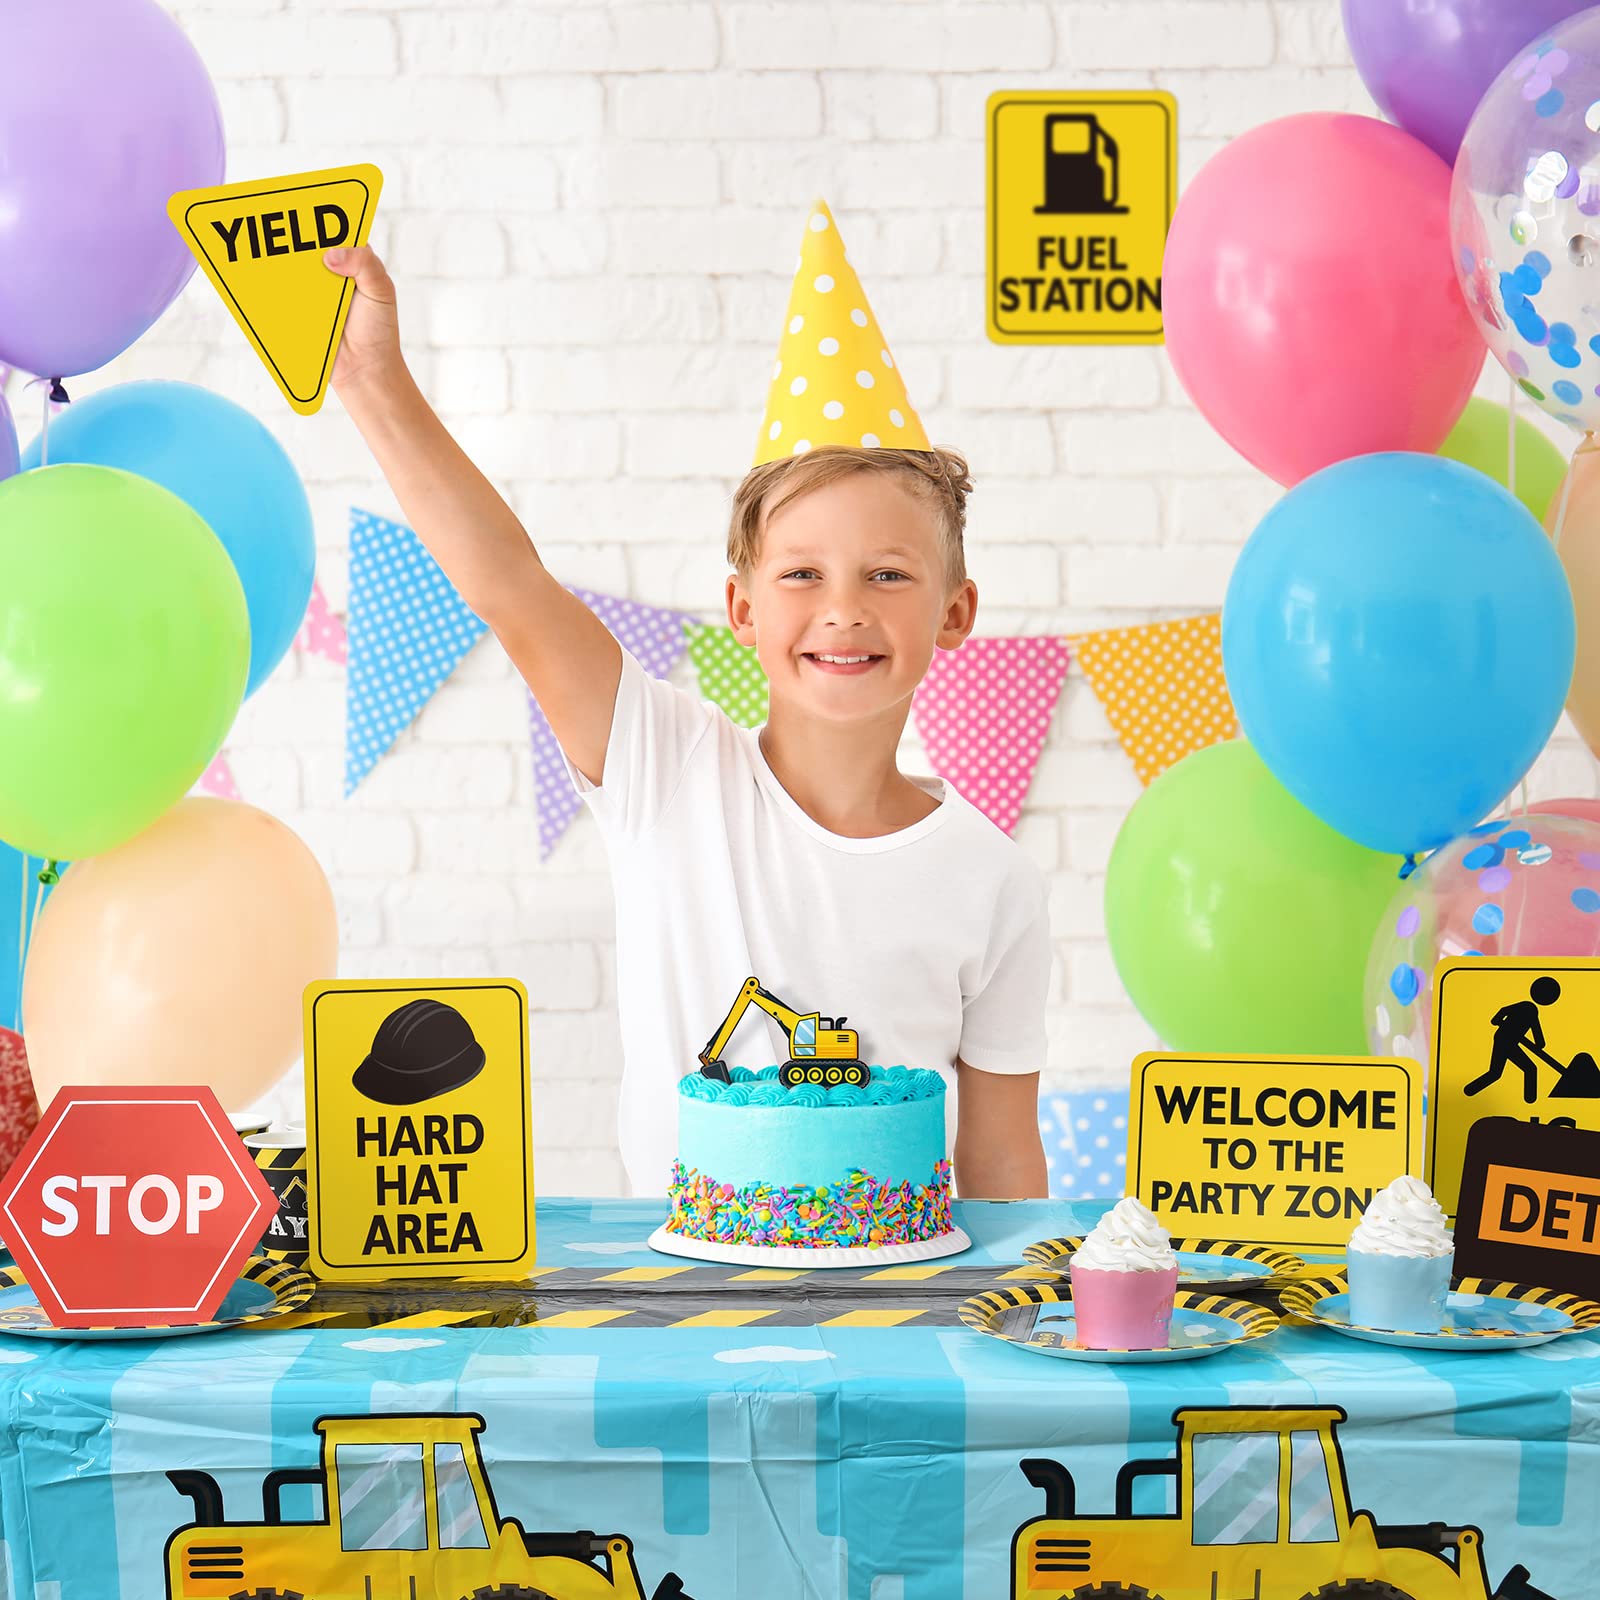 Cutouts of traffic signs construction birthday party ideas